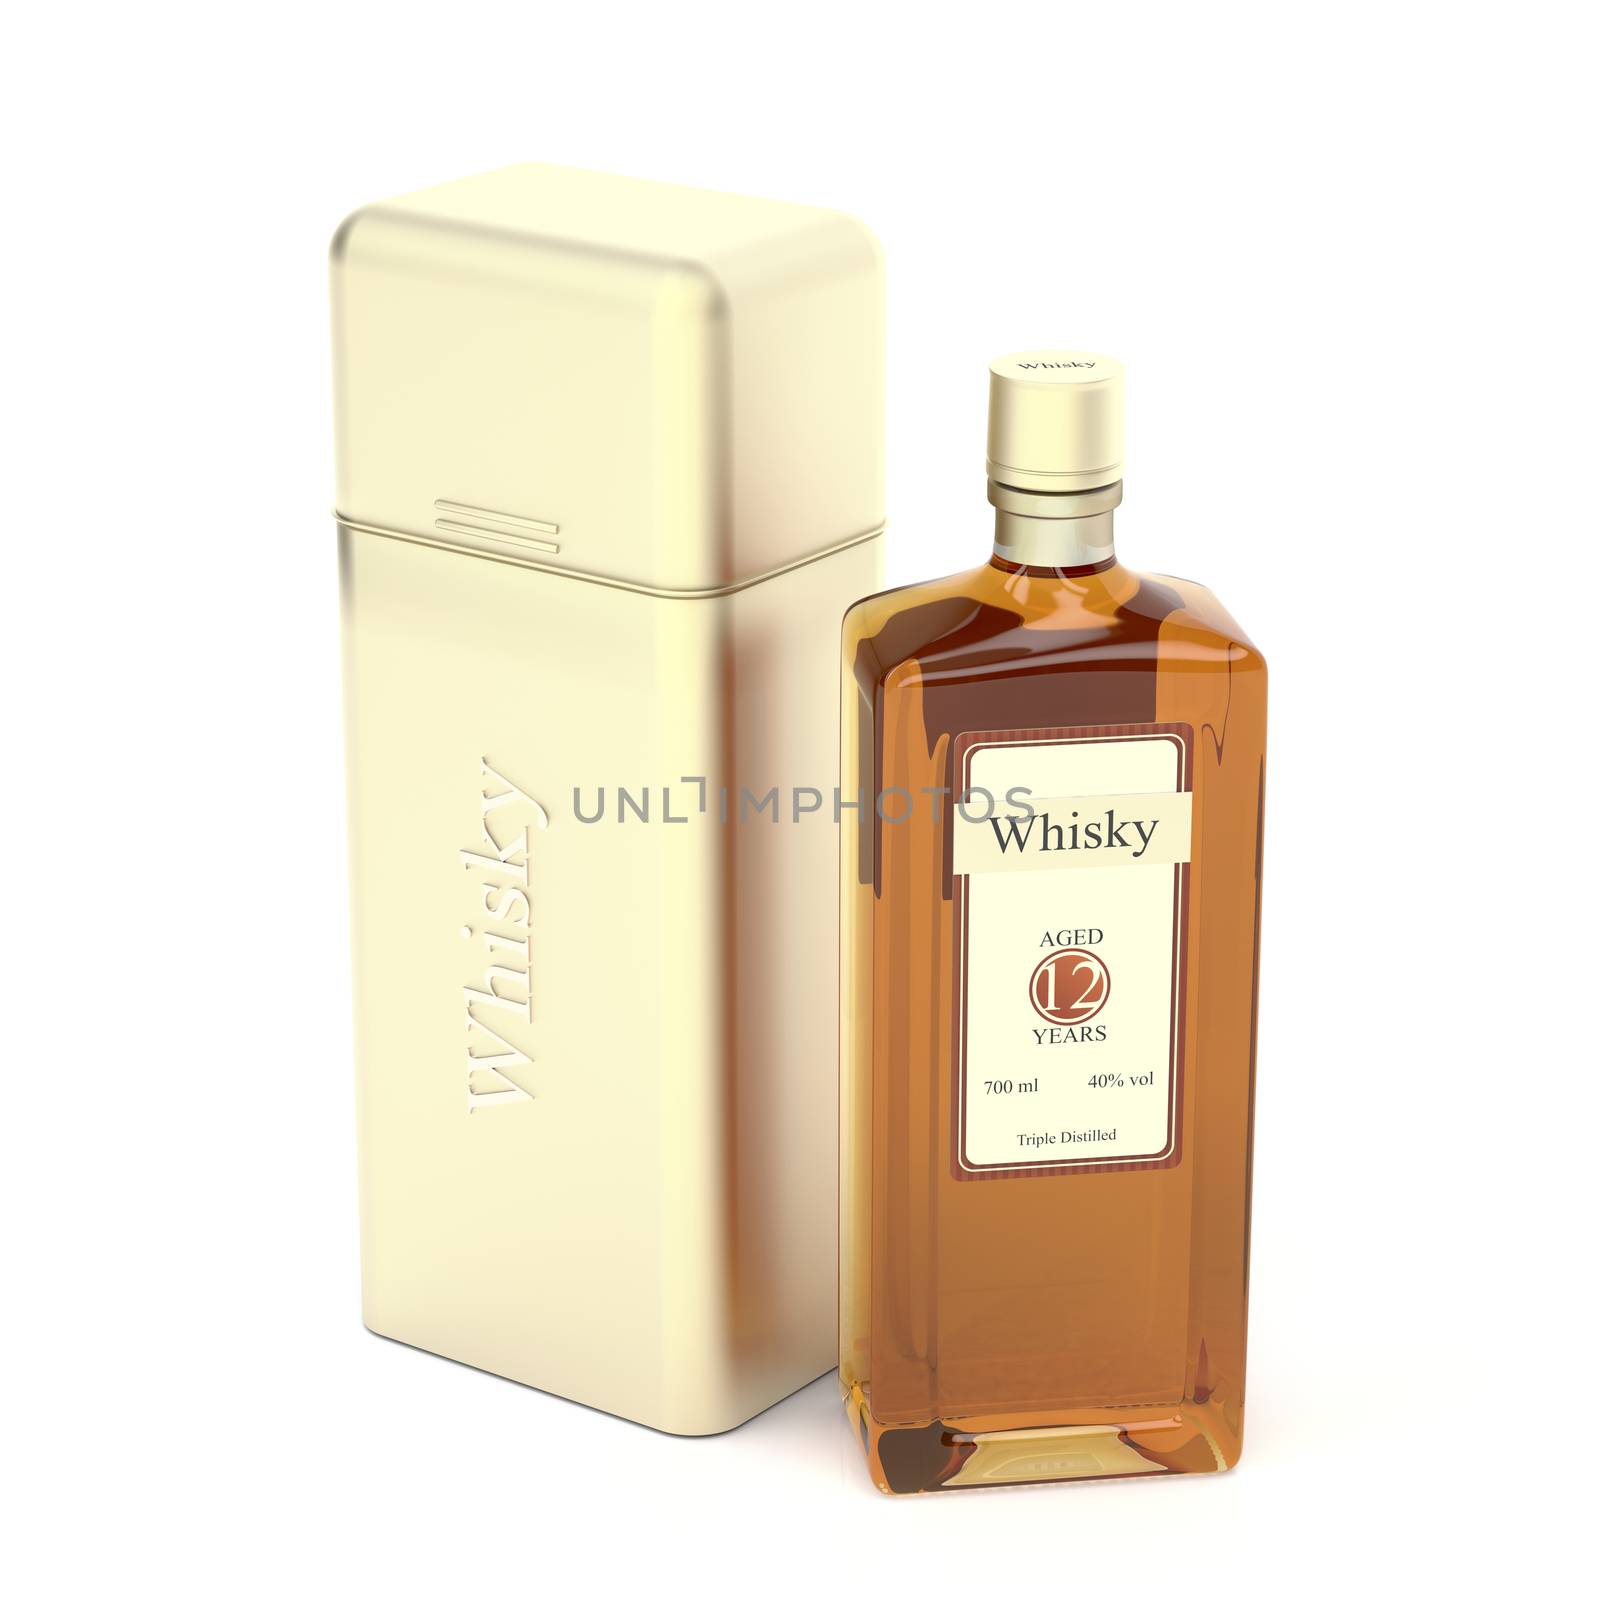 Whisky bottle and metal box by magraphics